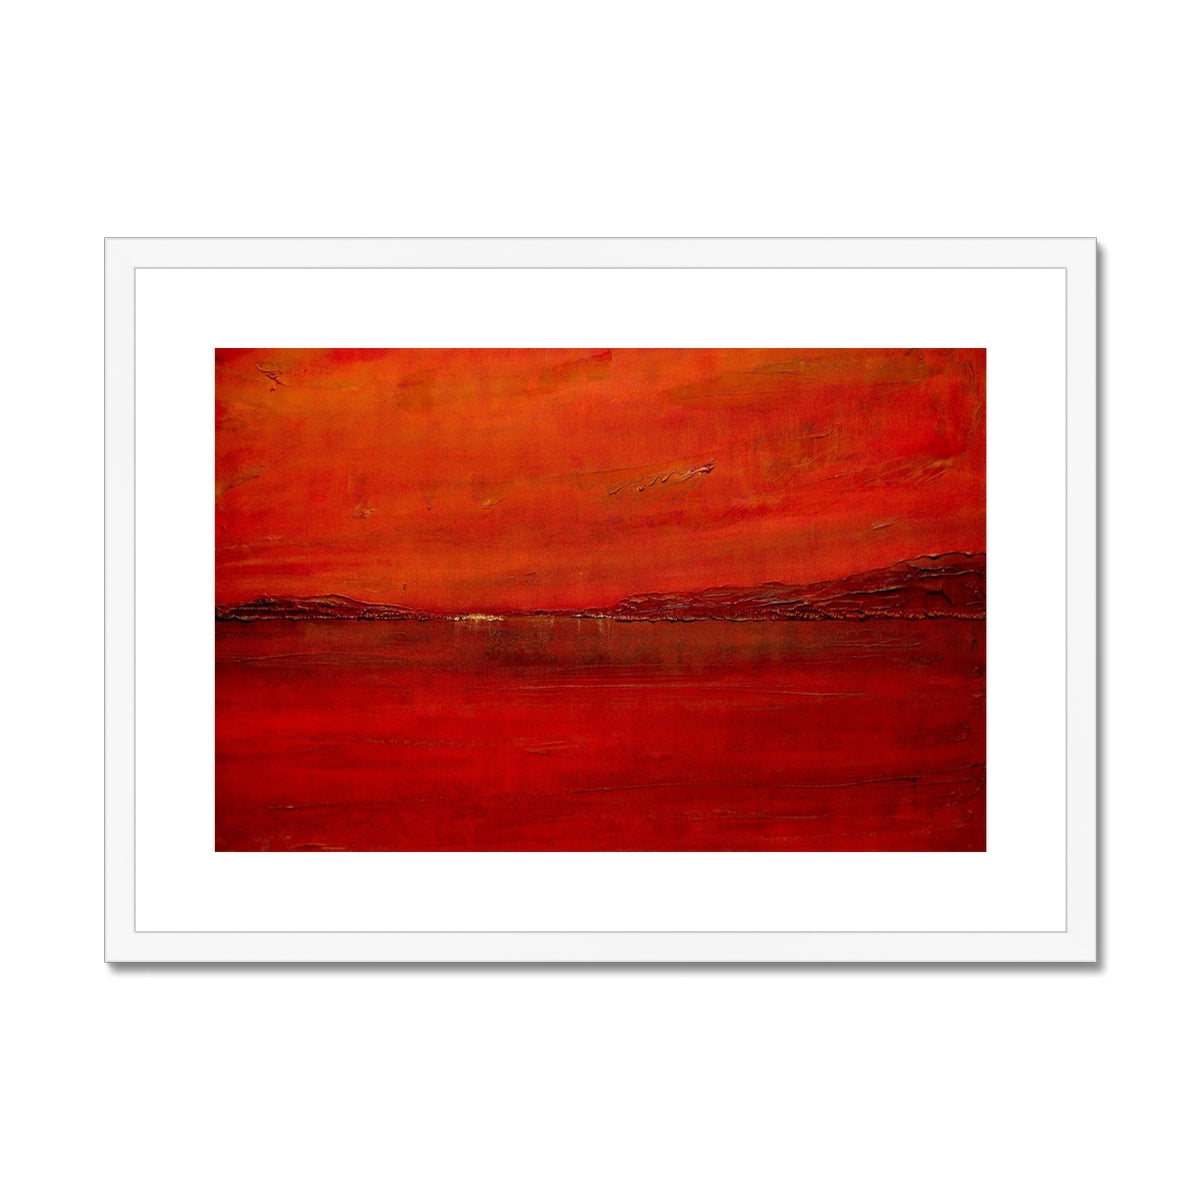 Deep Loch Lomond Sunset Painting | Framed & Mounted Prints From Scotland-Framed & Mounted Prints-Scottish Lochs & Mountains Art Gallery-A2 Landscape-White Frame-Paintings, Prints, Homeware, Art Gifts From Scotland By Scottish Artist Kevin Hunter